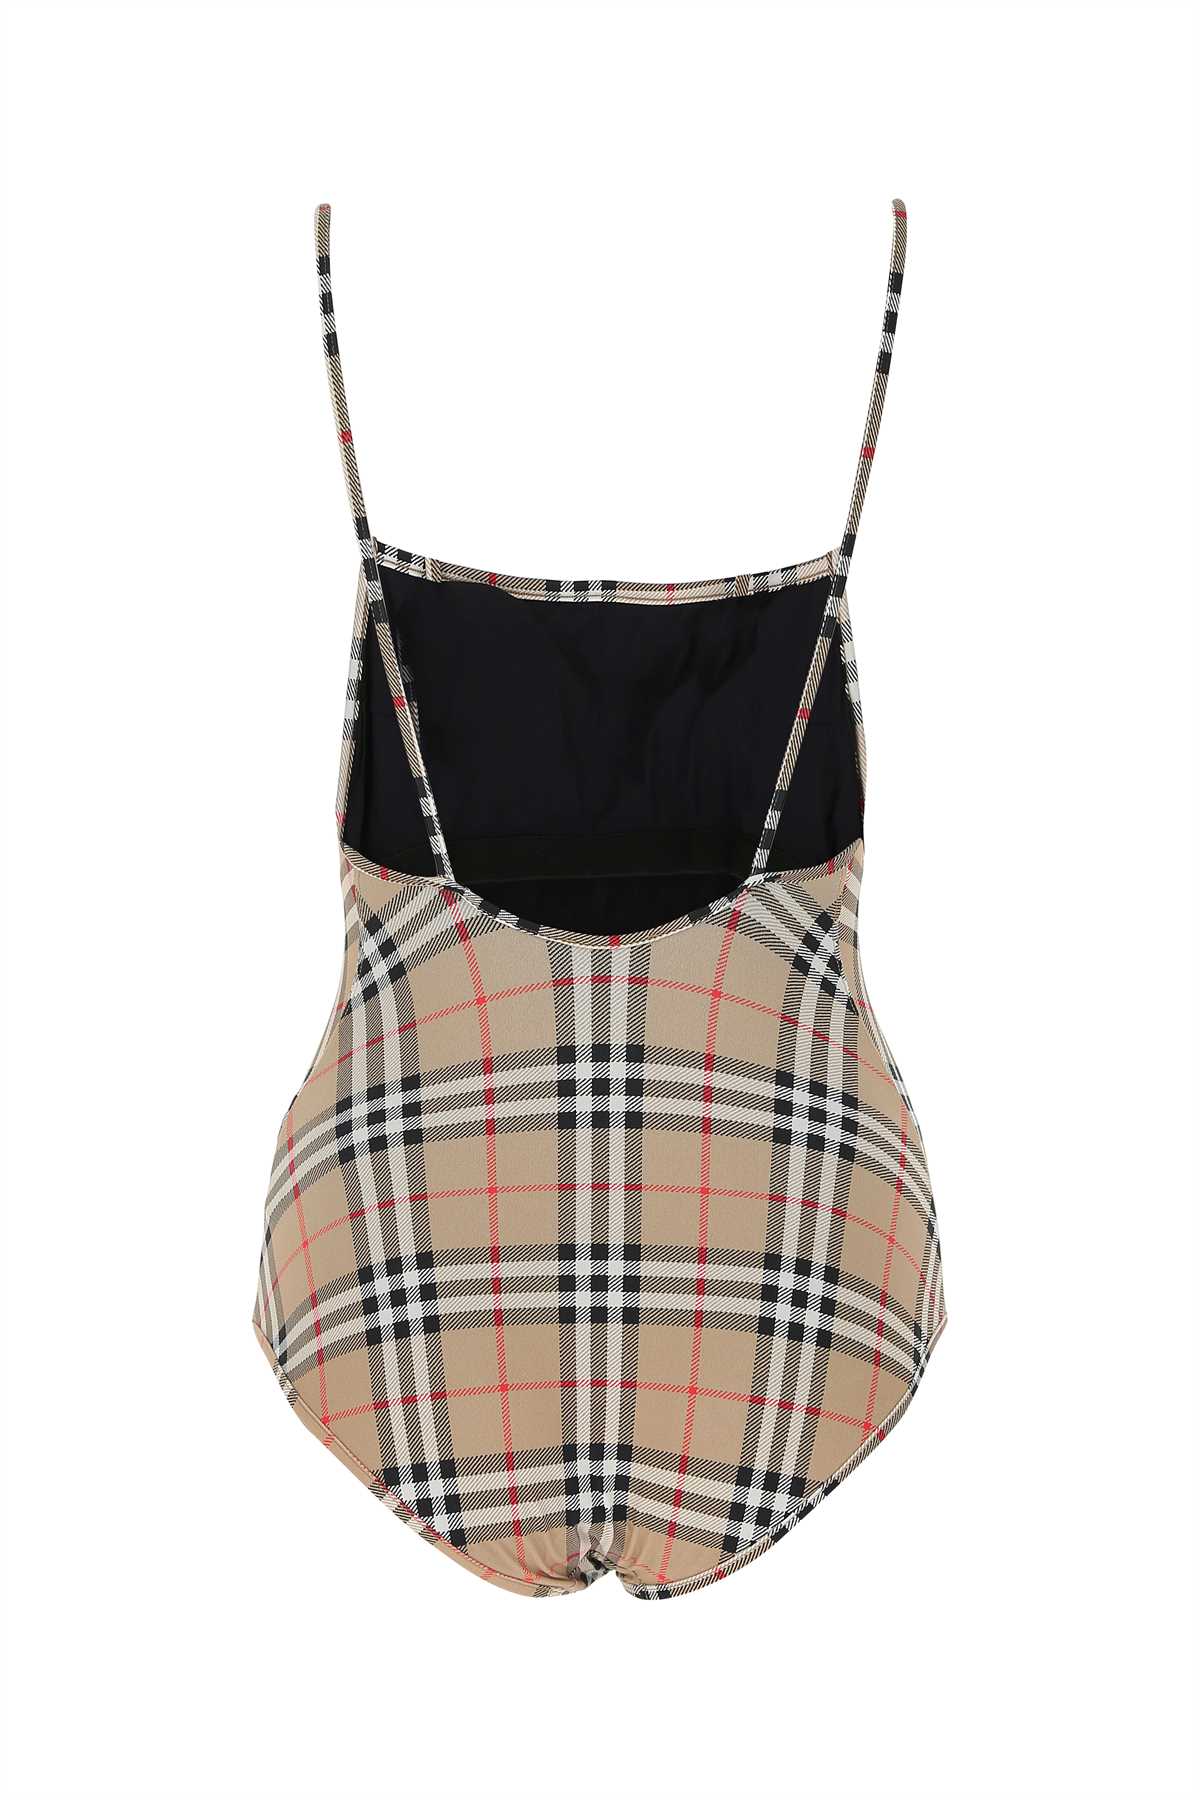 Burberry Printed Stretch Nylon Swimsuit In A5145